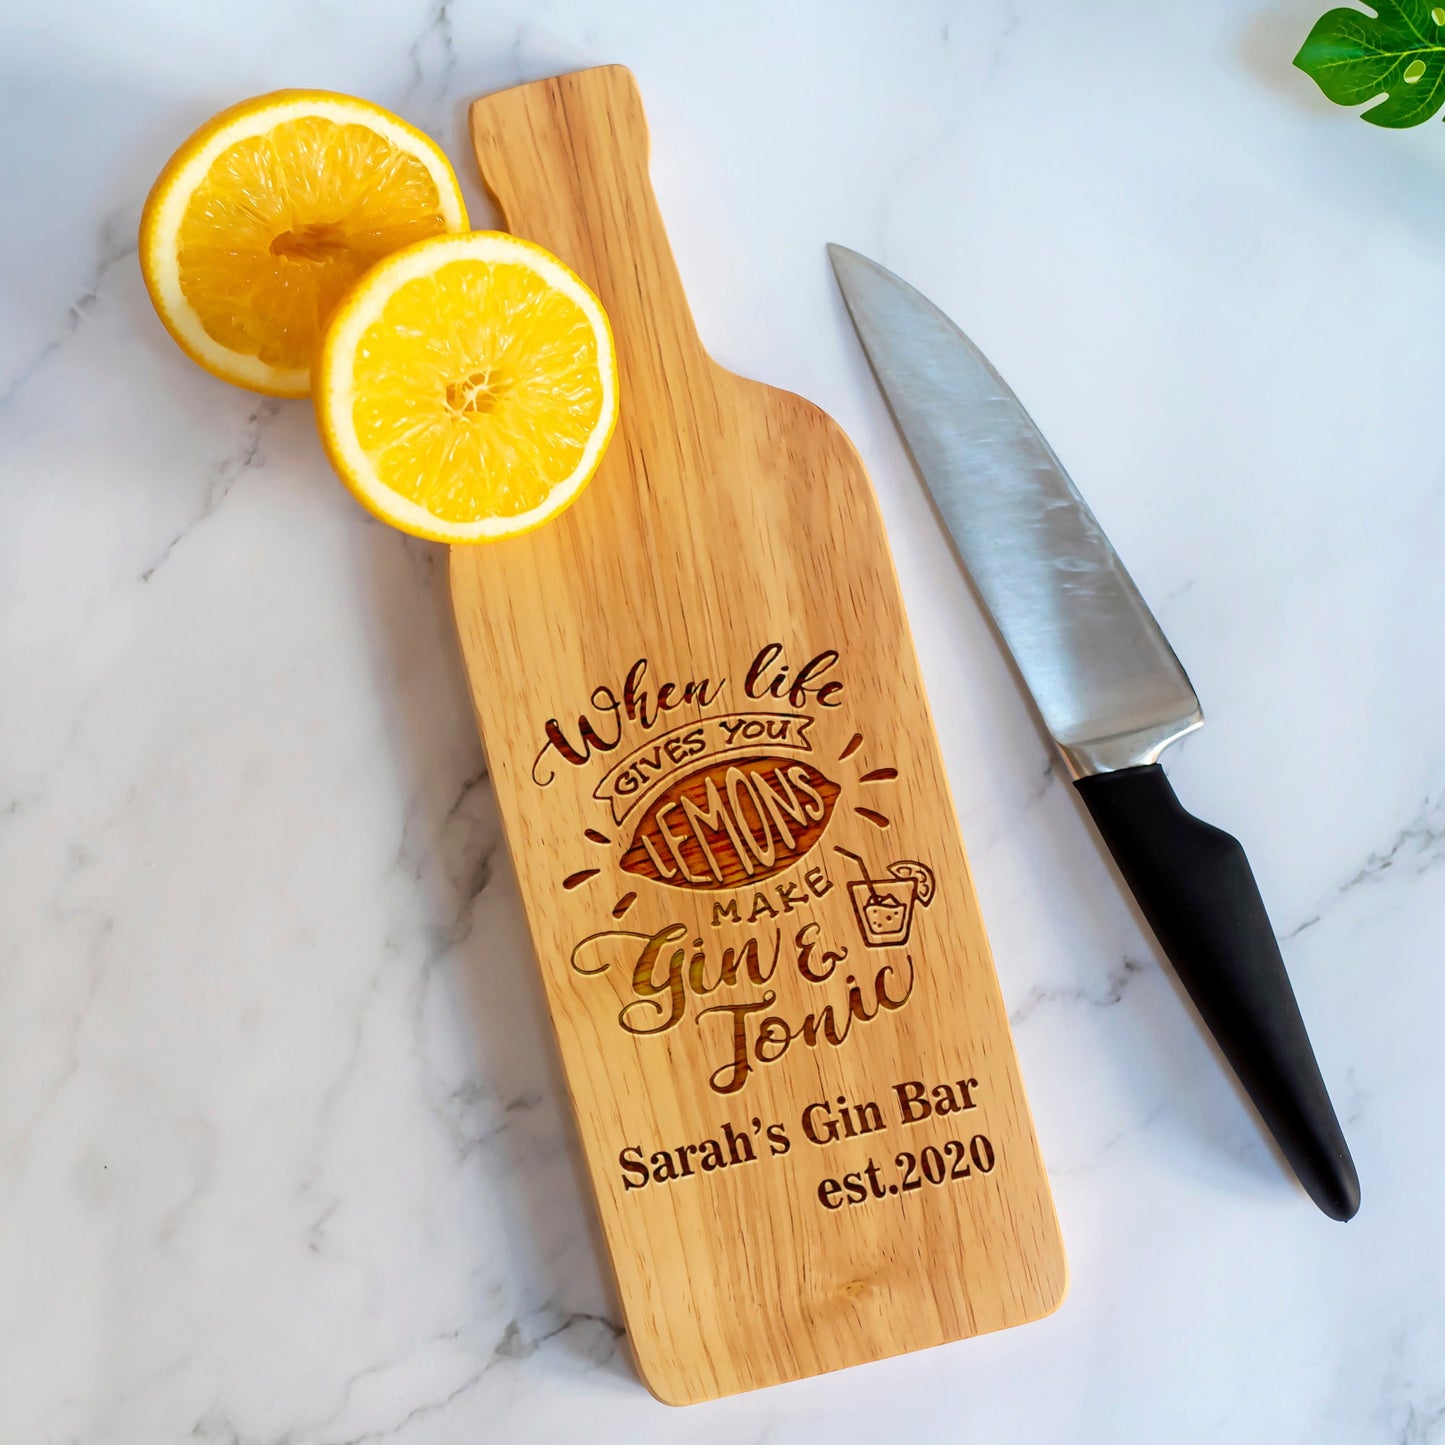 Personalised Name - Est Date , Life Gives you Lemons Make Gin & Tonic - Bottle Chopping Board Gift